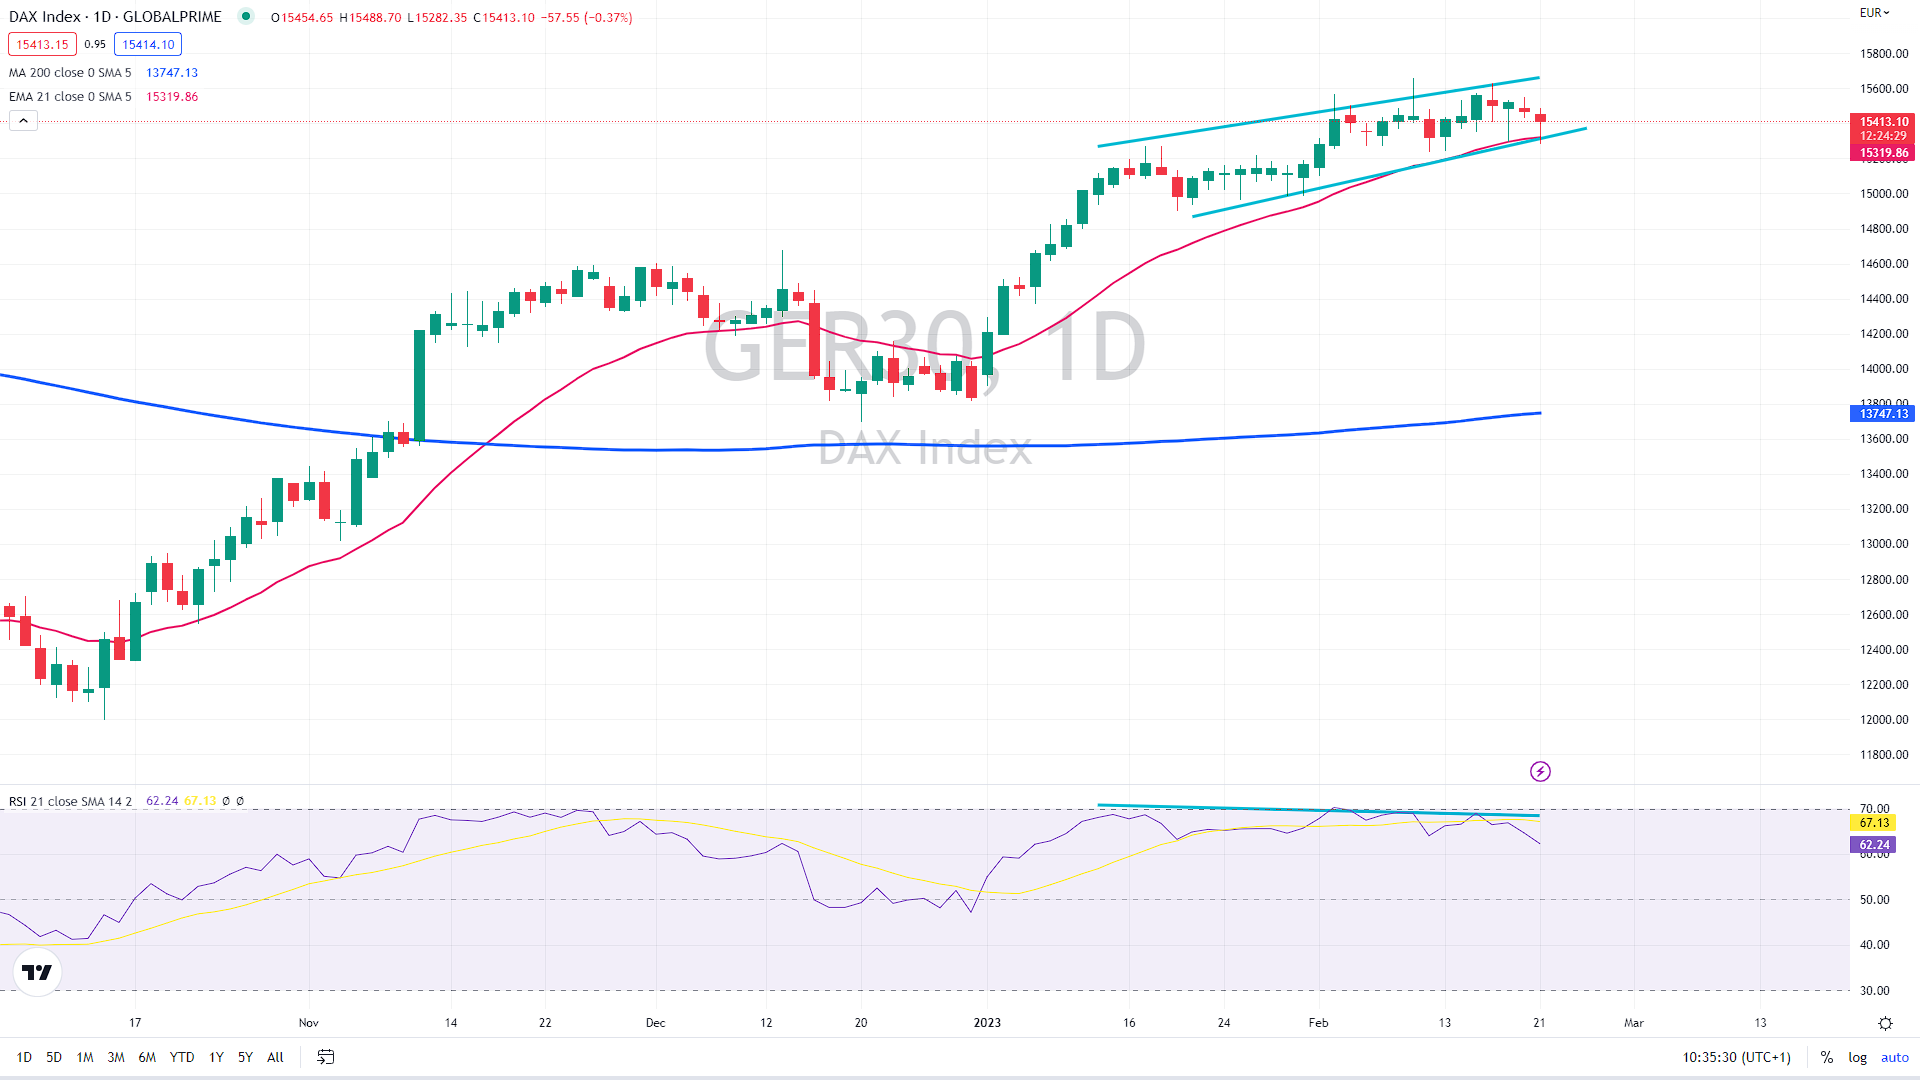 DAX index daily chart